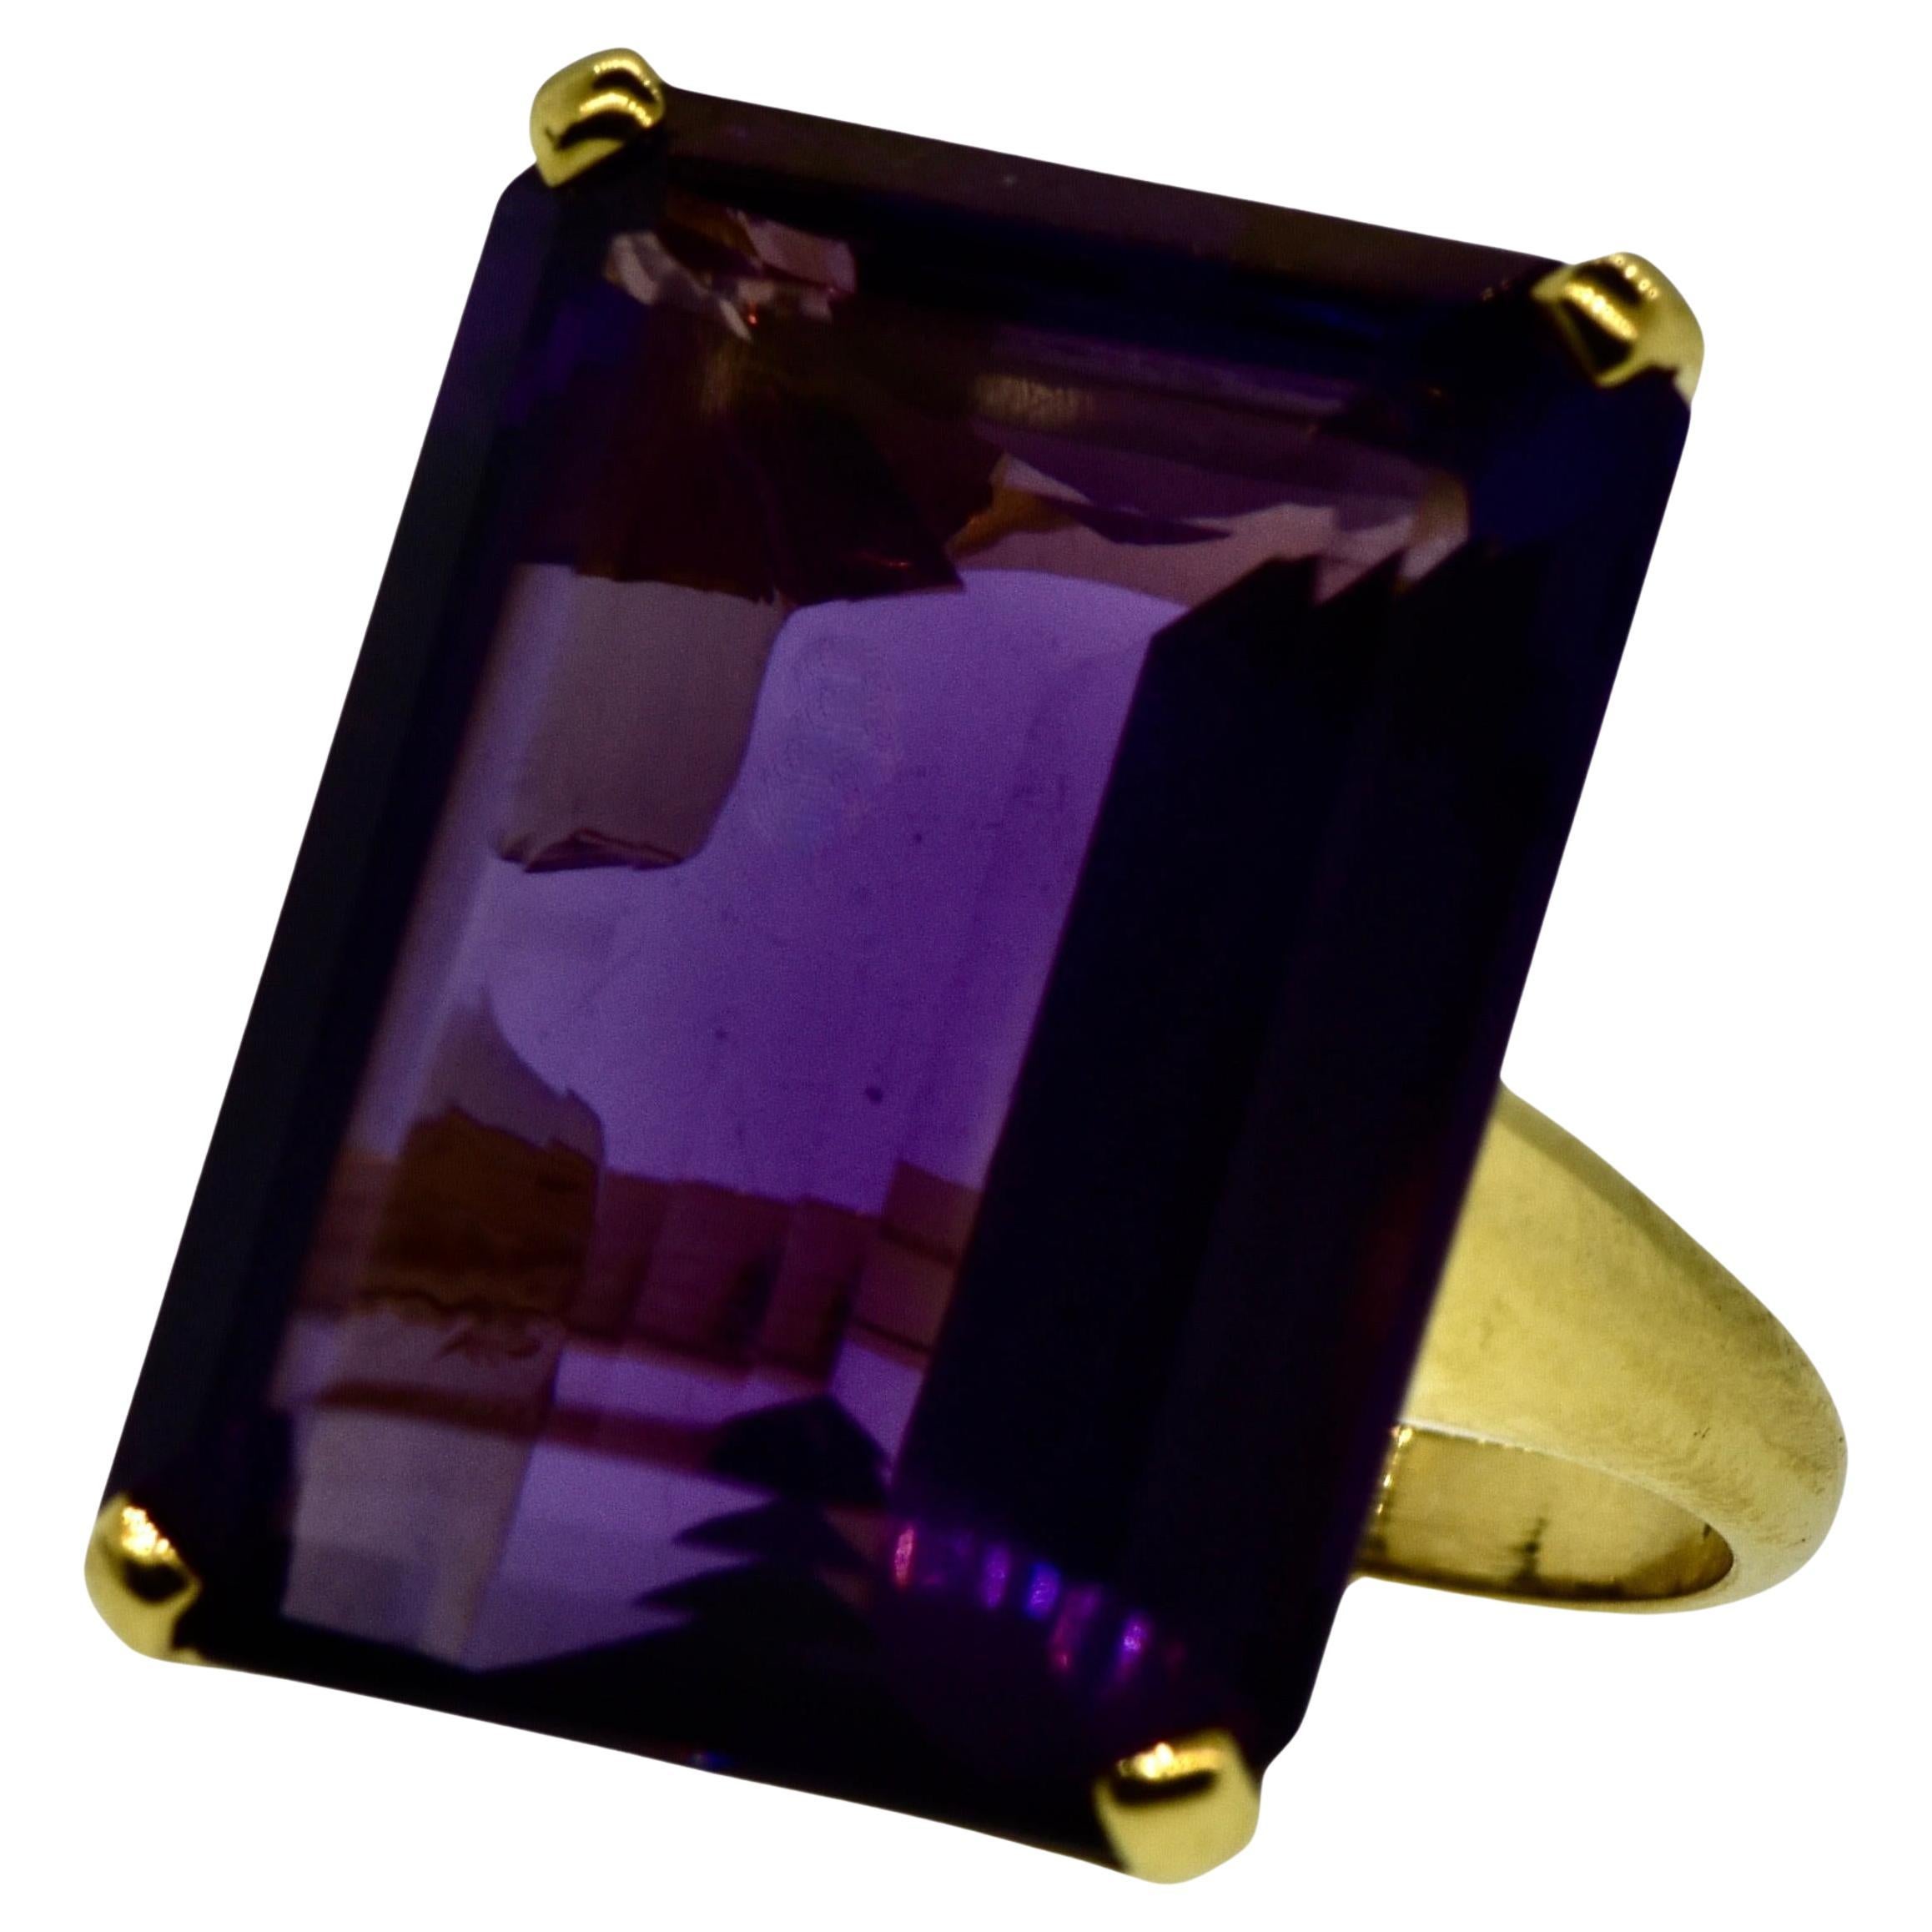 Very fine large emerald cut amethyst displaying a vivid deep purple with flashes of red, this new ring is hand crafted in 18K yellow gold by Pierre/Famille of Aspen, CO. 

The long emerald cut amethyst weighs 36.21 cts. It is a size 6.5 and can be